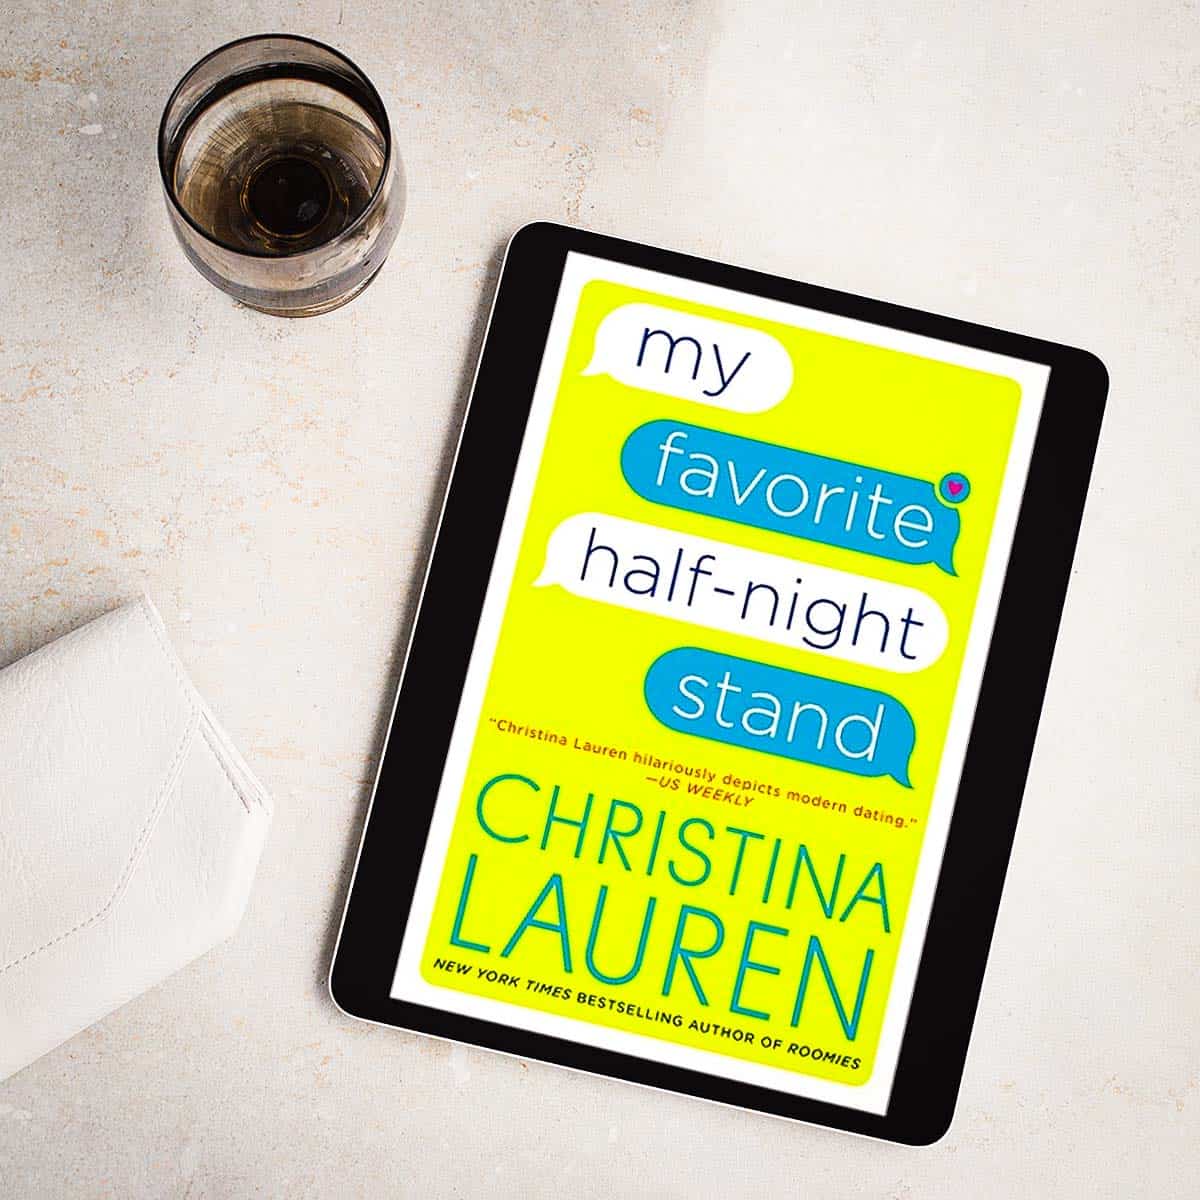 My Favorite Half-Night Stand by Christina Lauren – Quirky & Smart